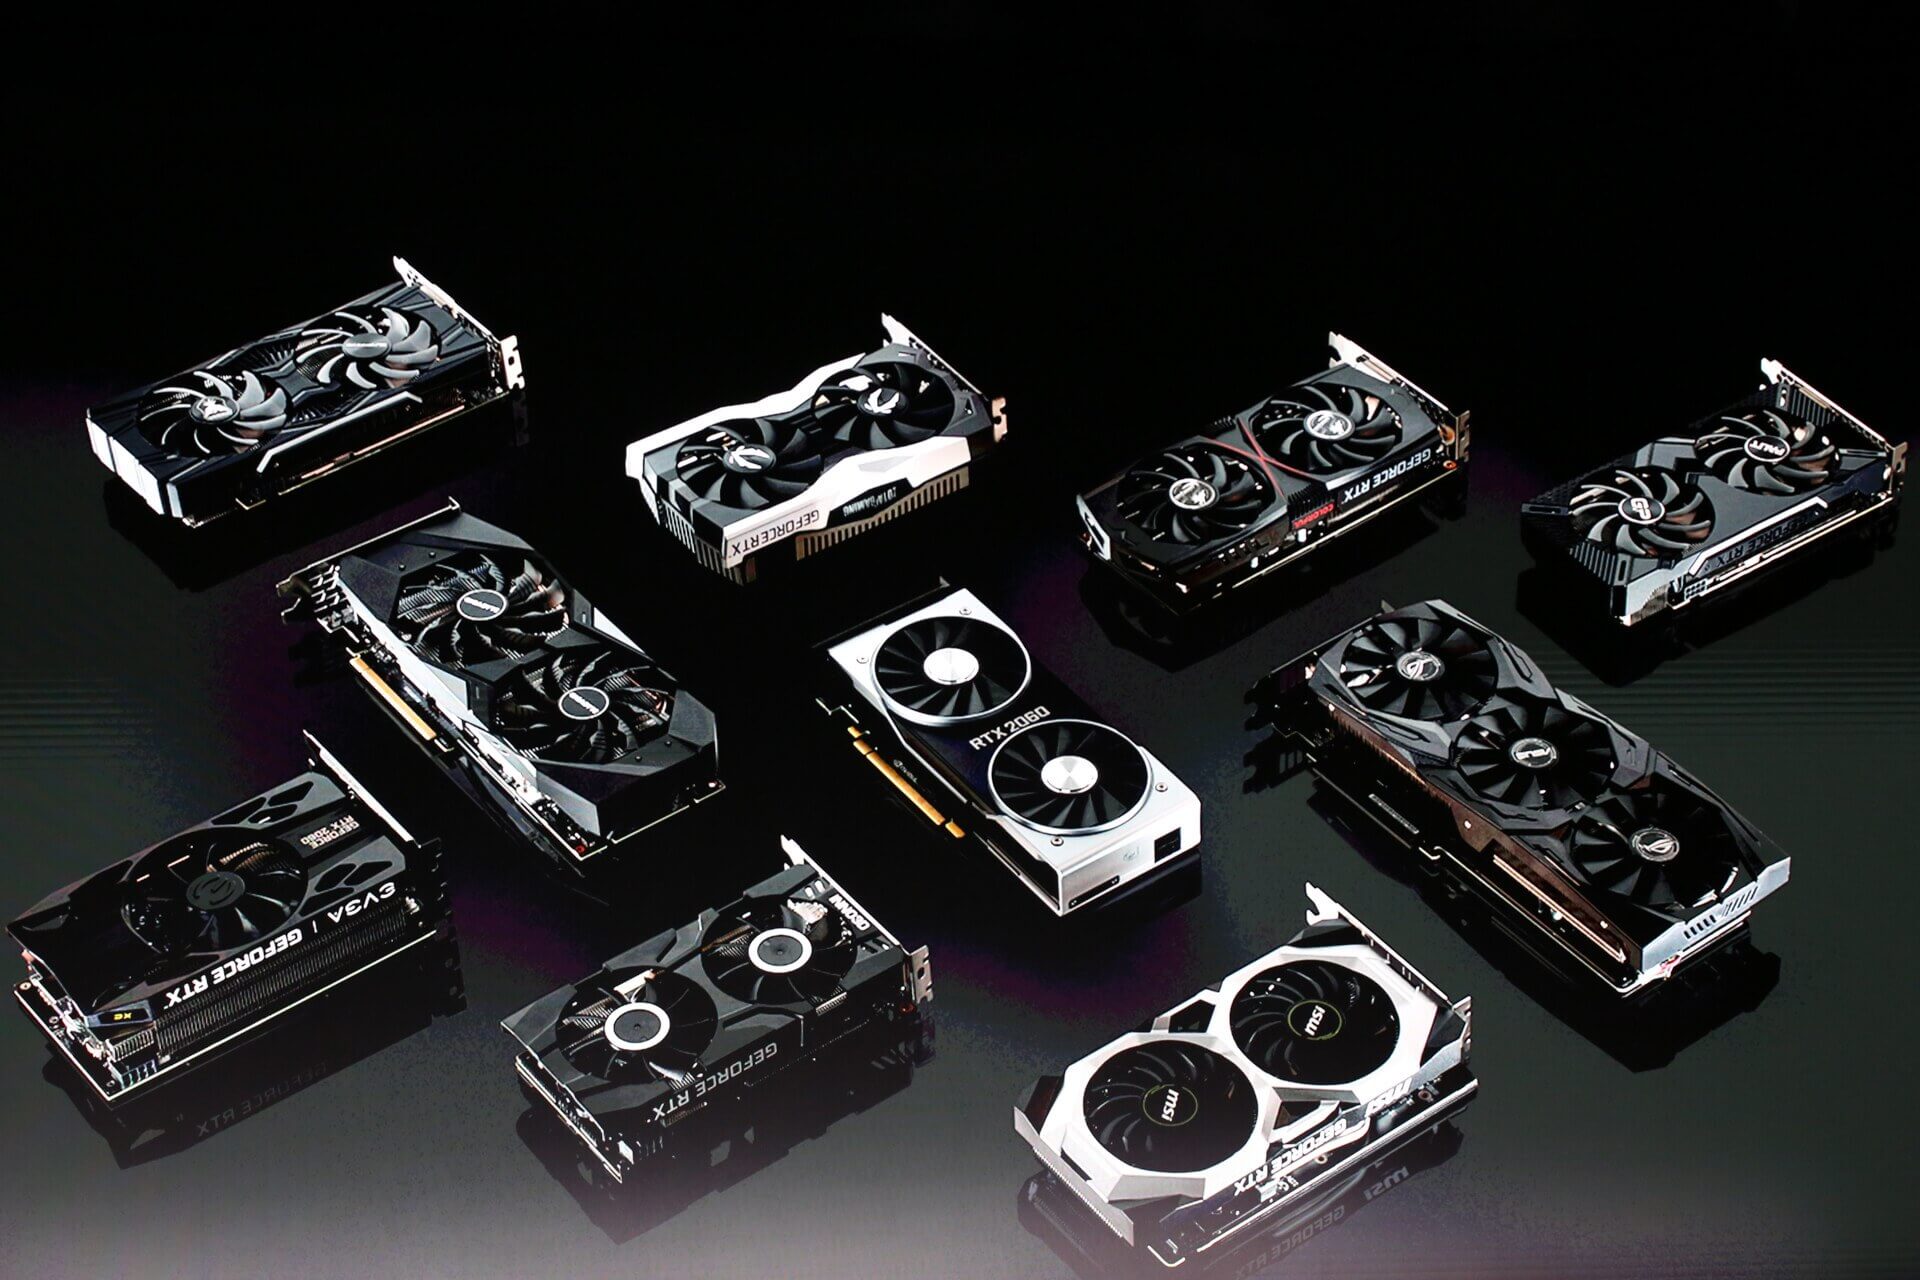 Report: Nvidia is cutting RTX 2060 supply to increase production of the RTX 3000 series